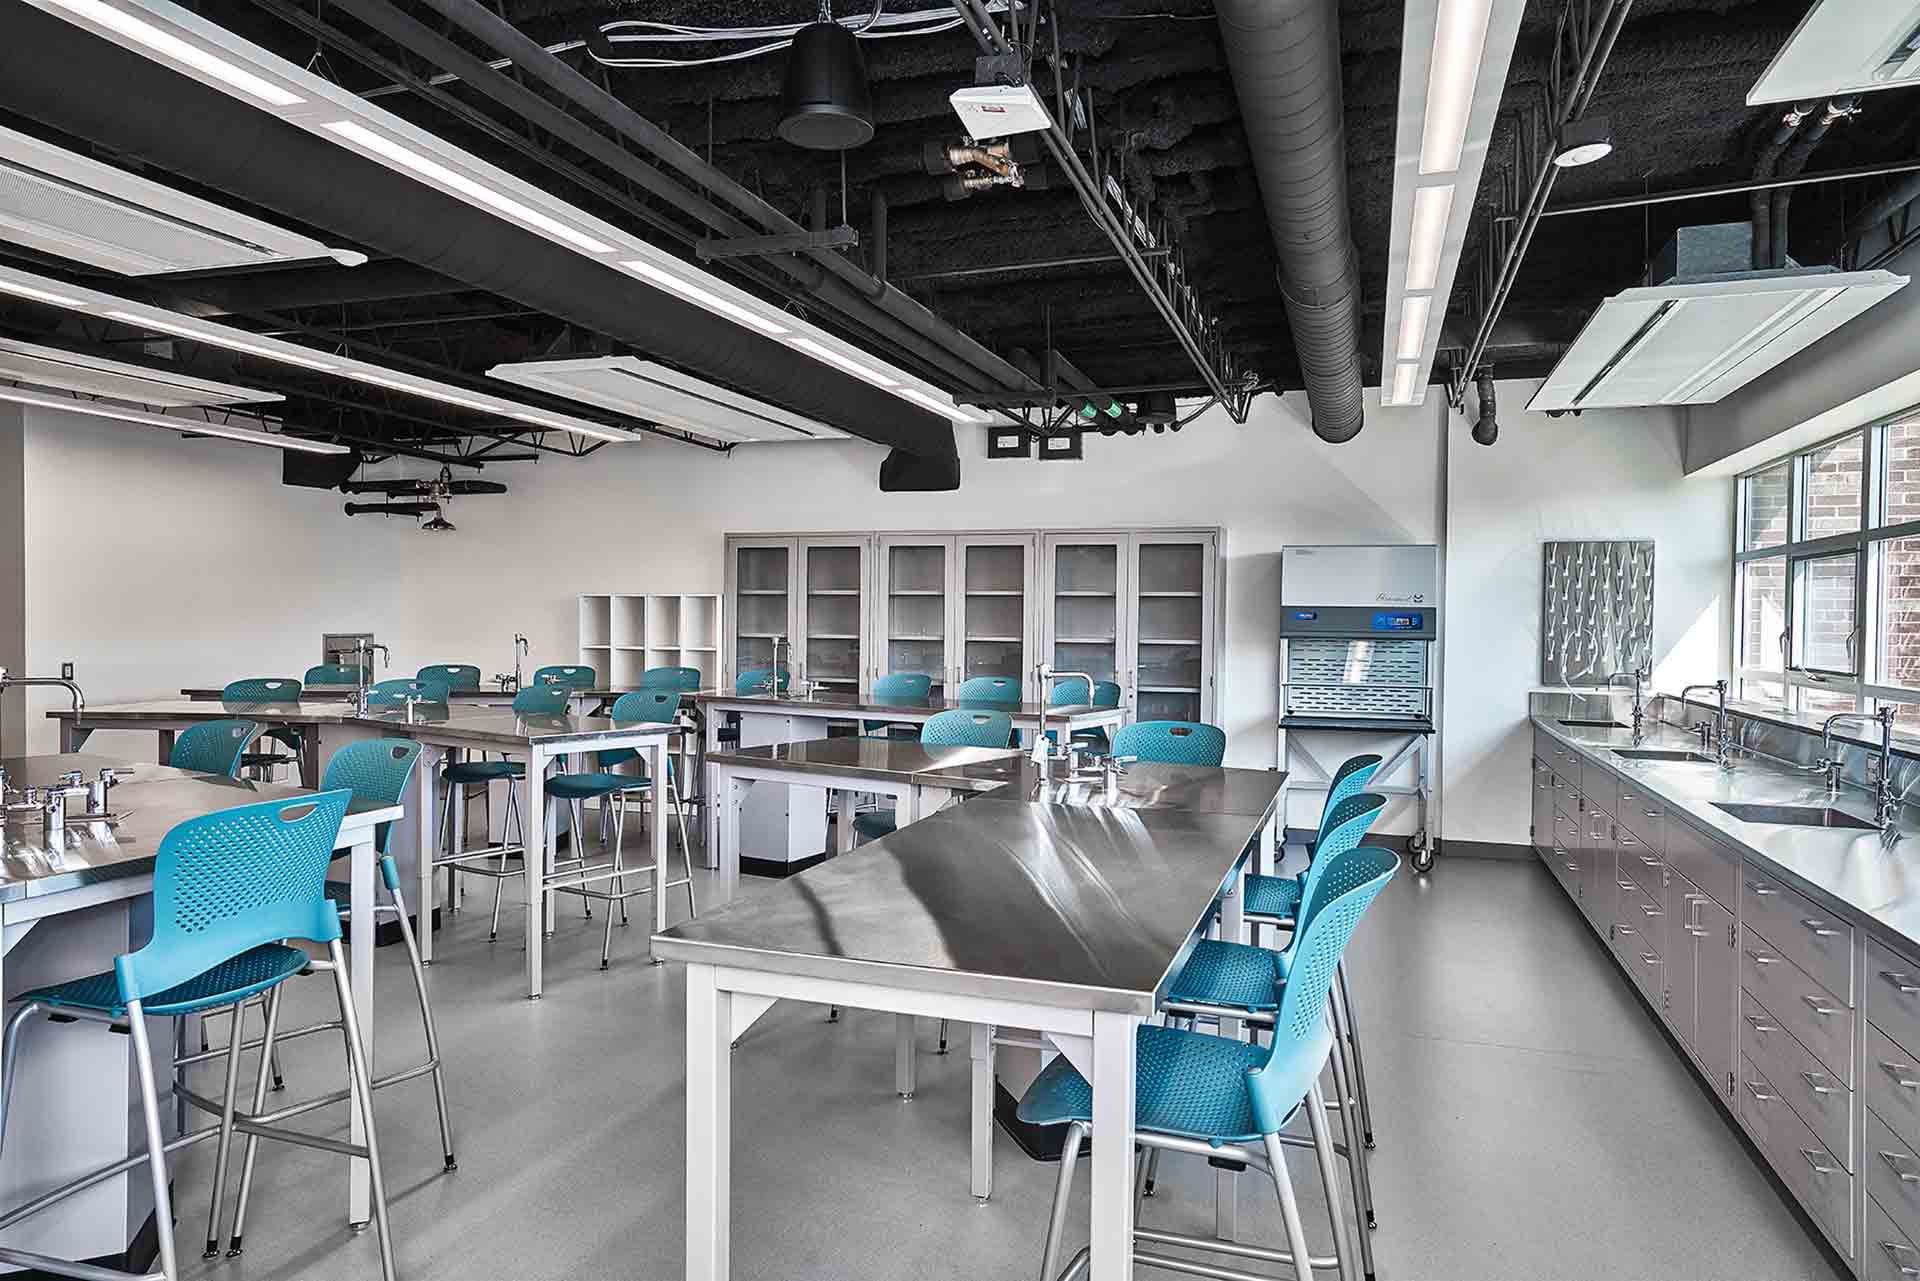 faith-in-the-future-campaign-classroom-blue-chairs